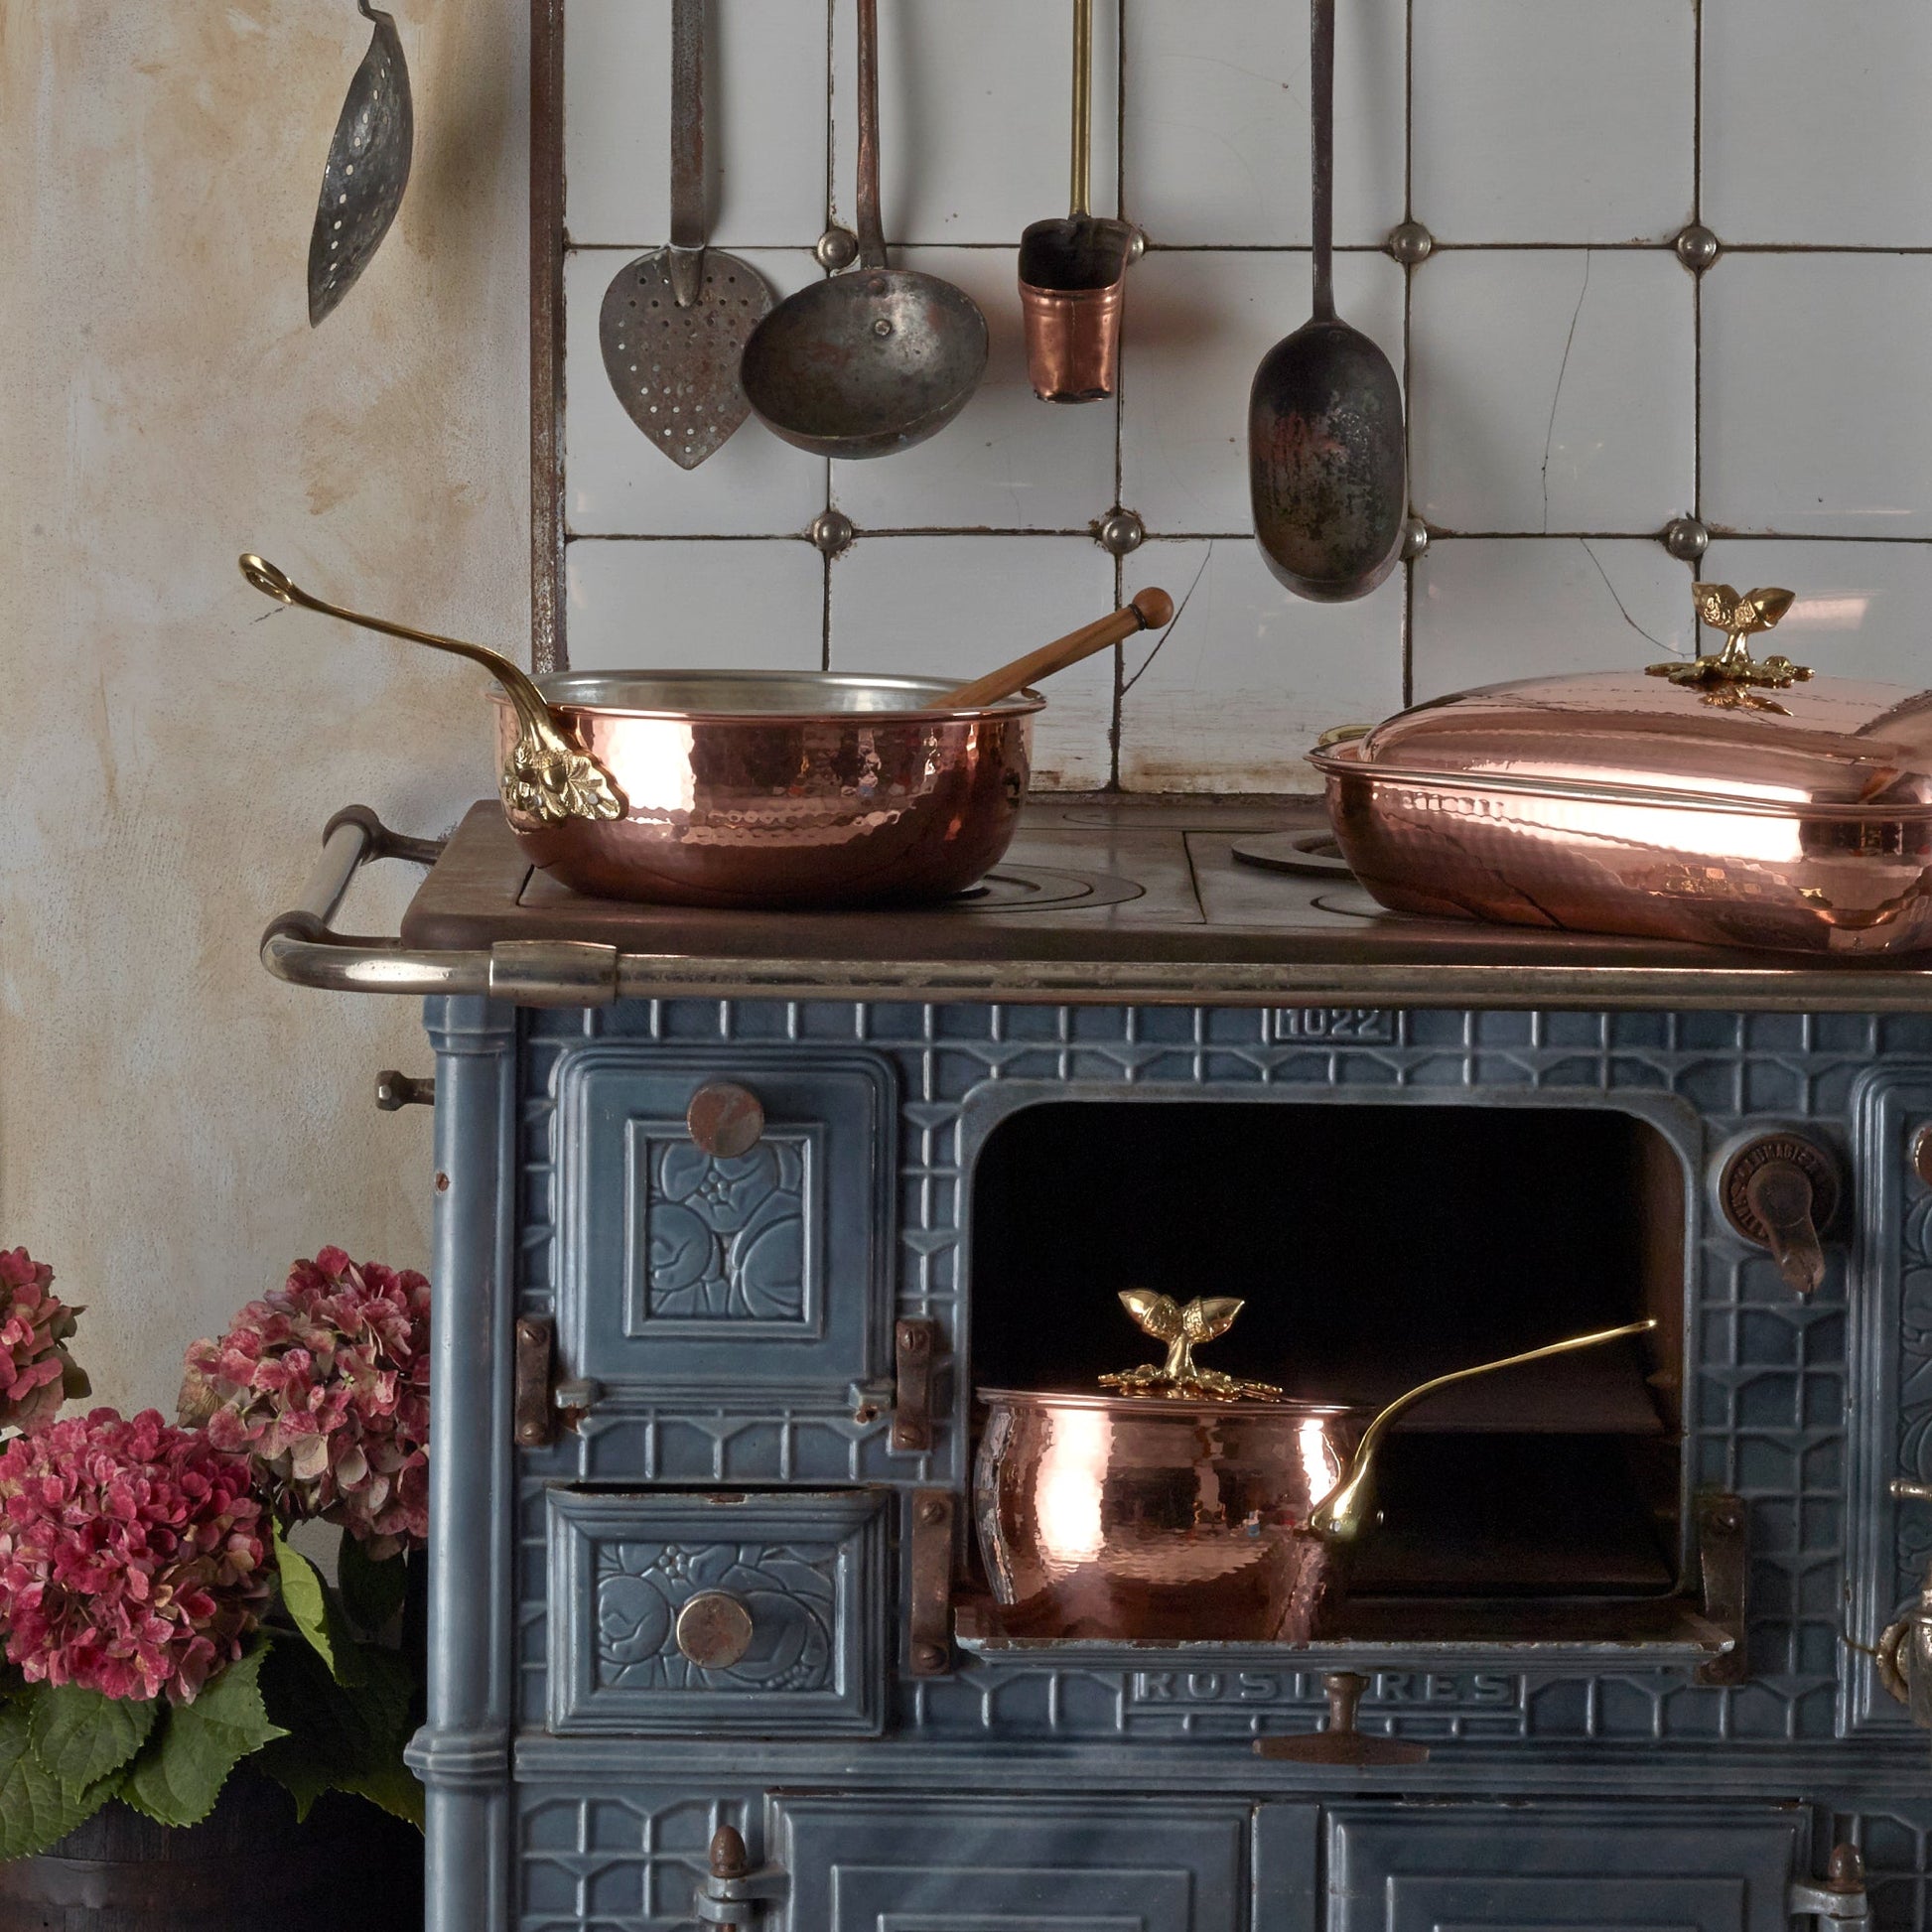 Hammered copper Chef's Pan lined with high purity tin applied by hand over fire and bronze handles, from Ruffoni Historia collection